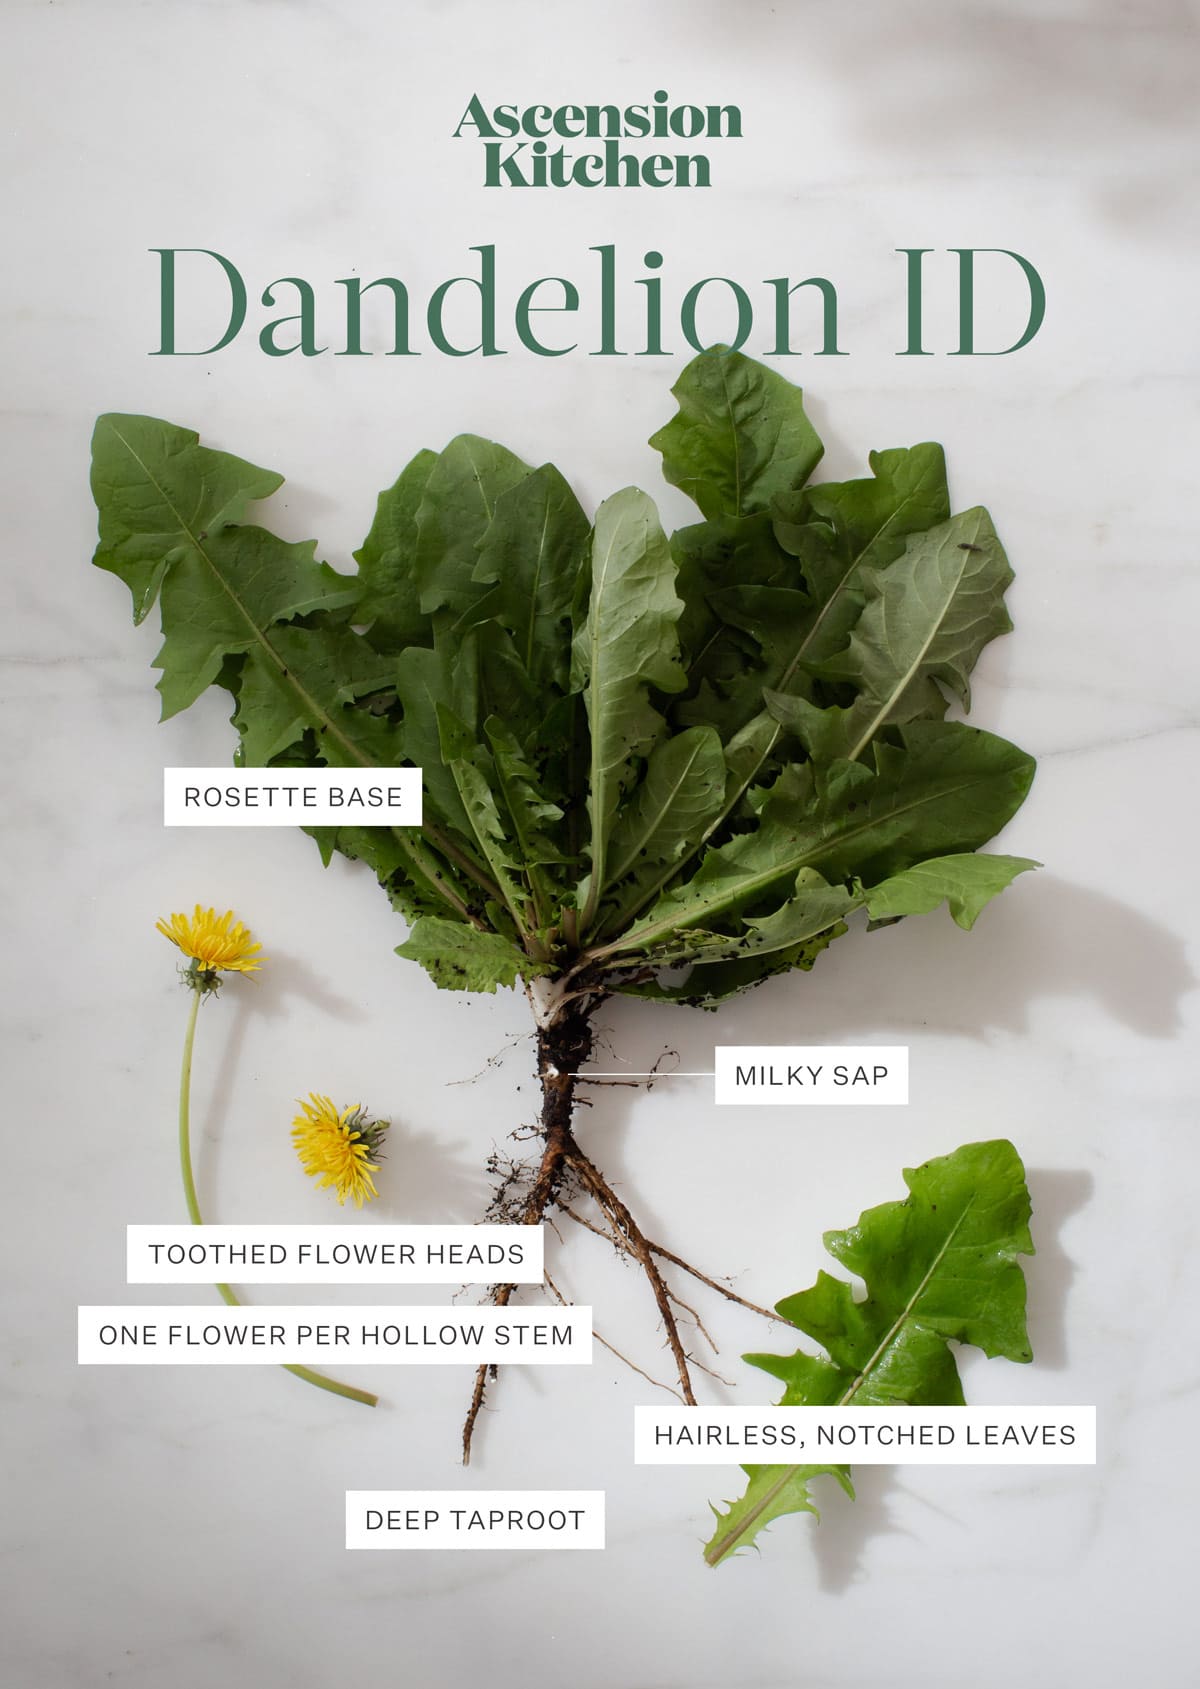 Flat lay of a dandelion plant pulled from the earth, with text to help identify key aspects, such as the rosette base, hollow stem with single flower, notched leaves, taproot and milky sap.